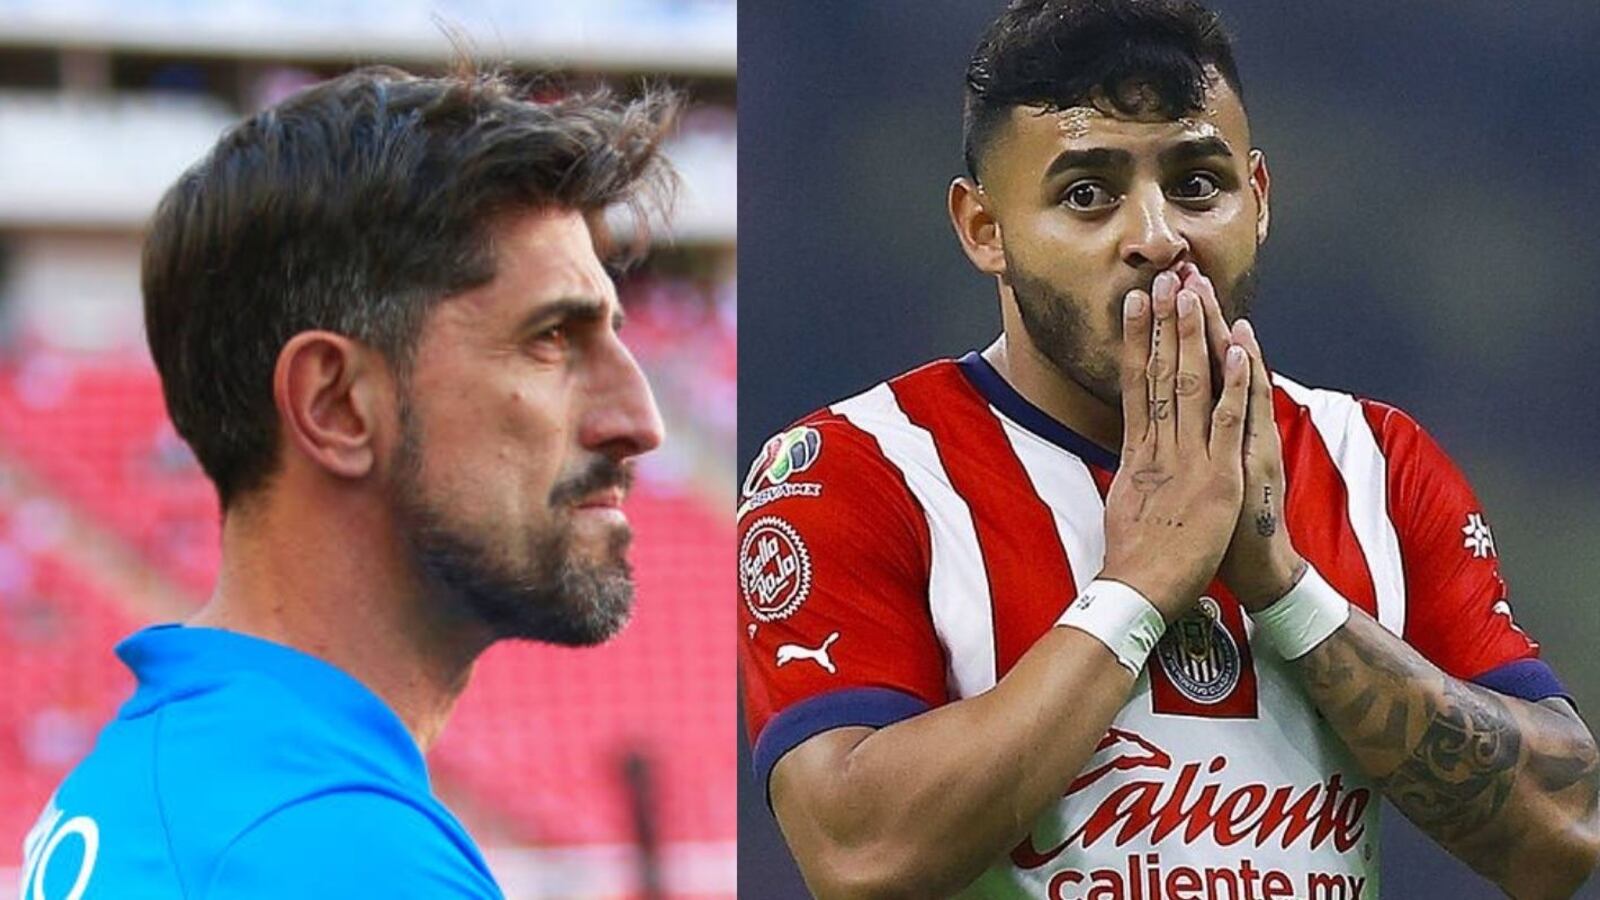 He did not like coming out of exchange and what Vega did against Paunovic in Chivas